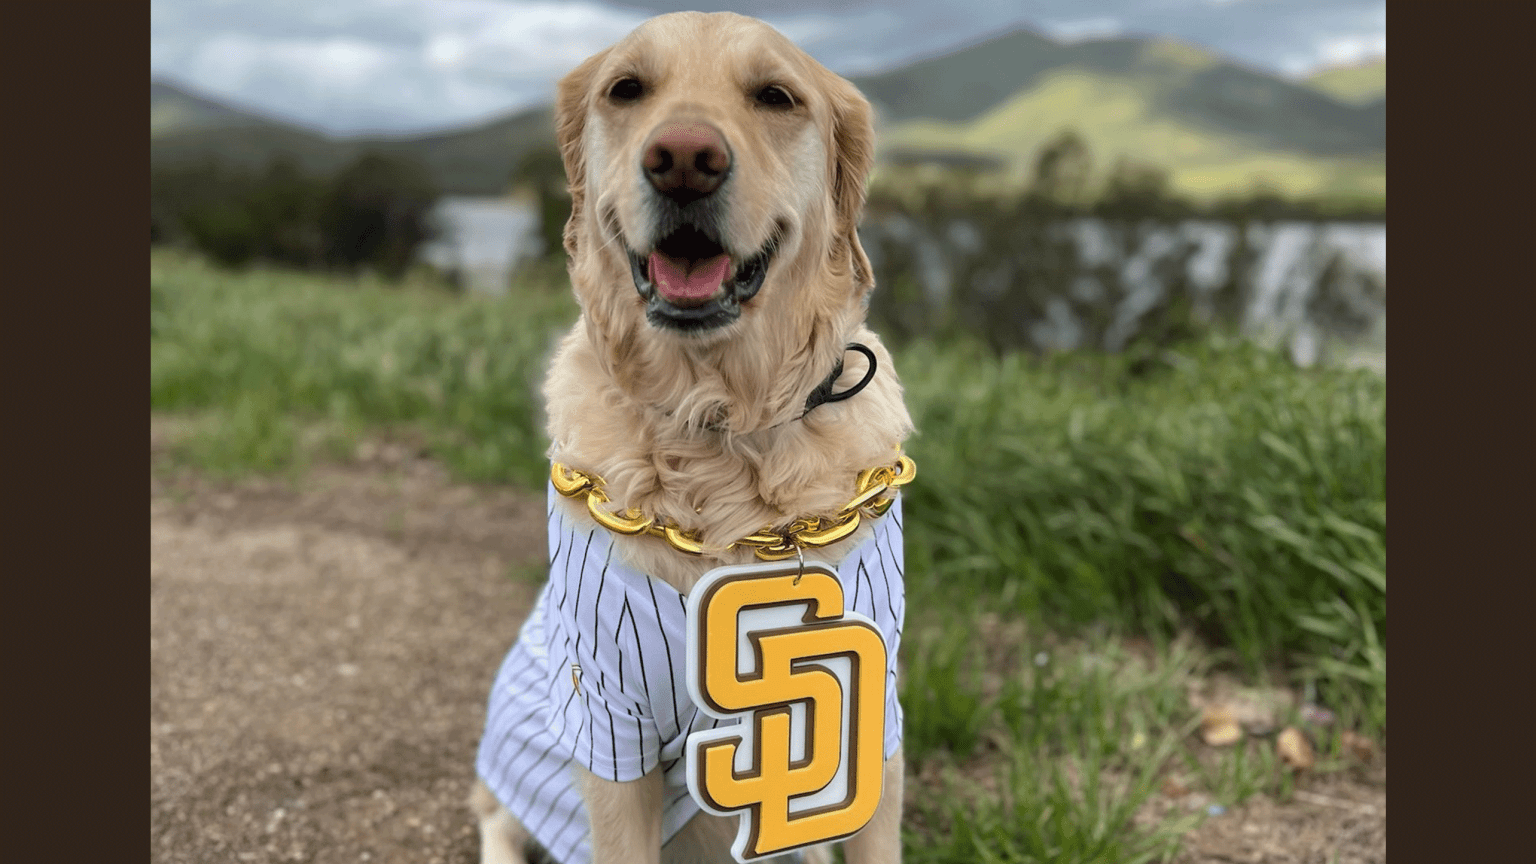 The Paw Squad  San Diego Padres